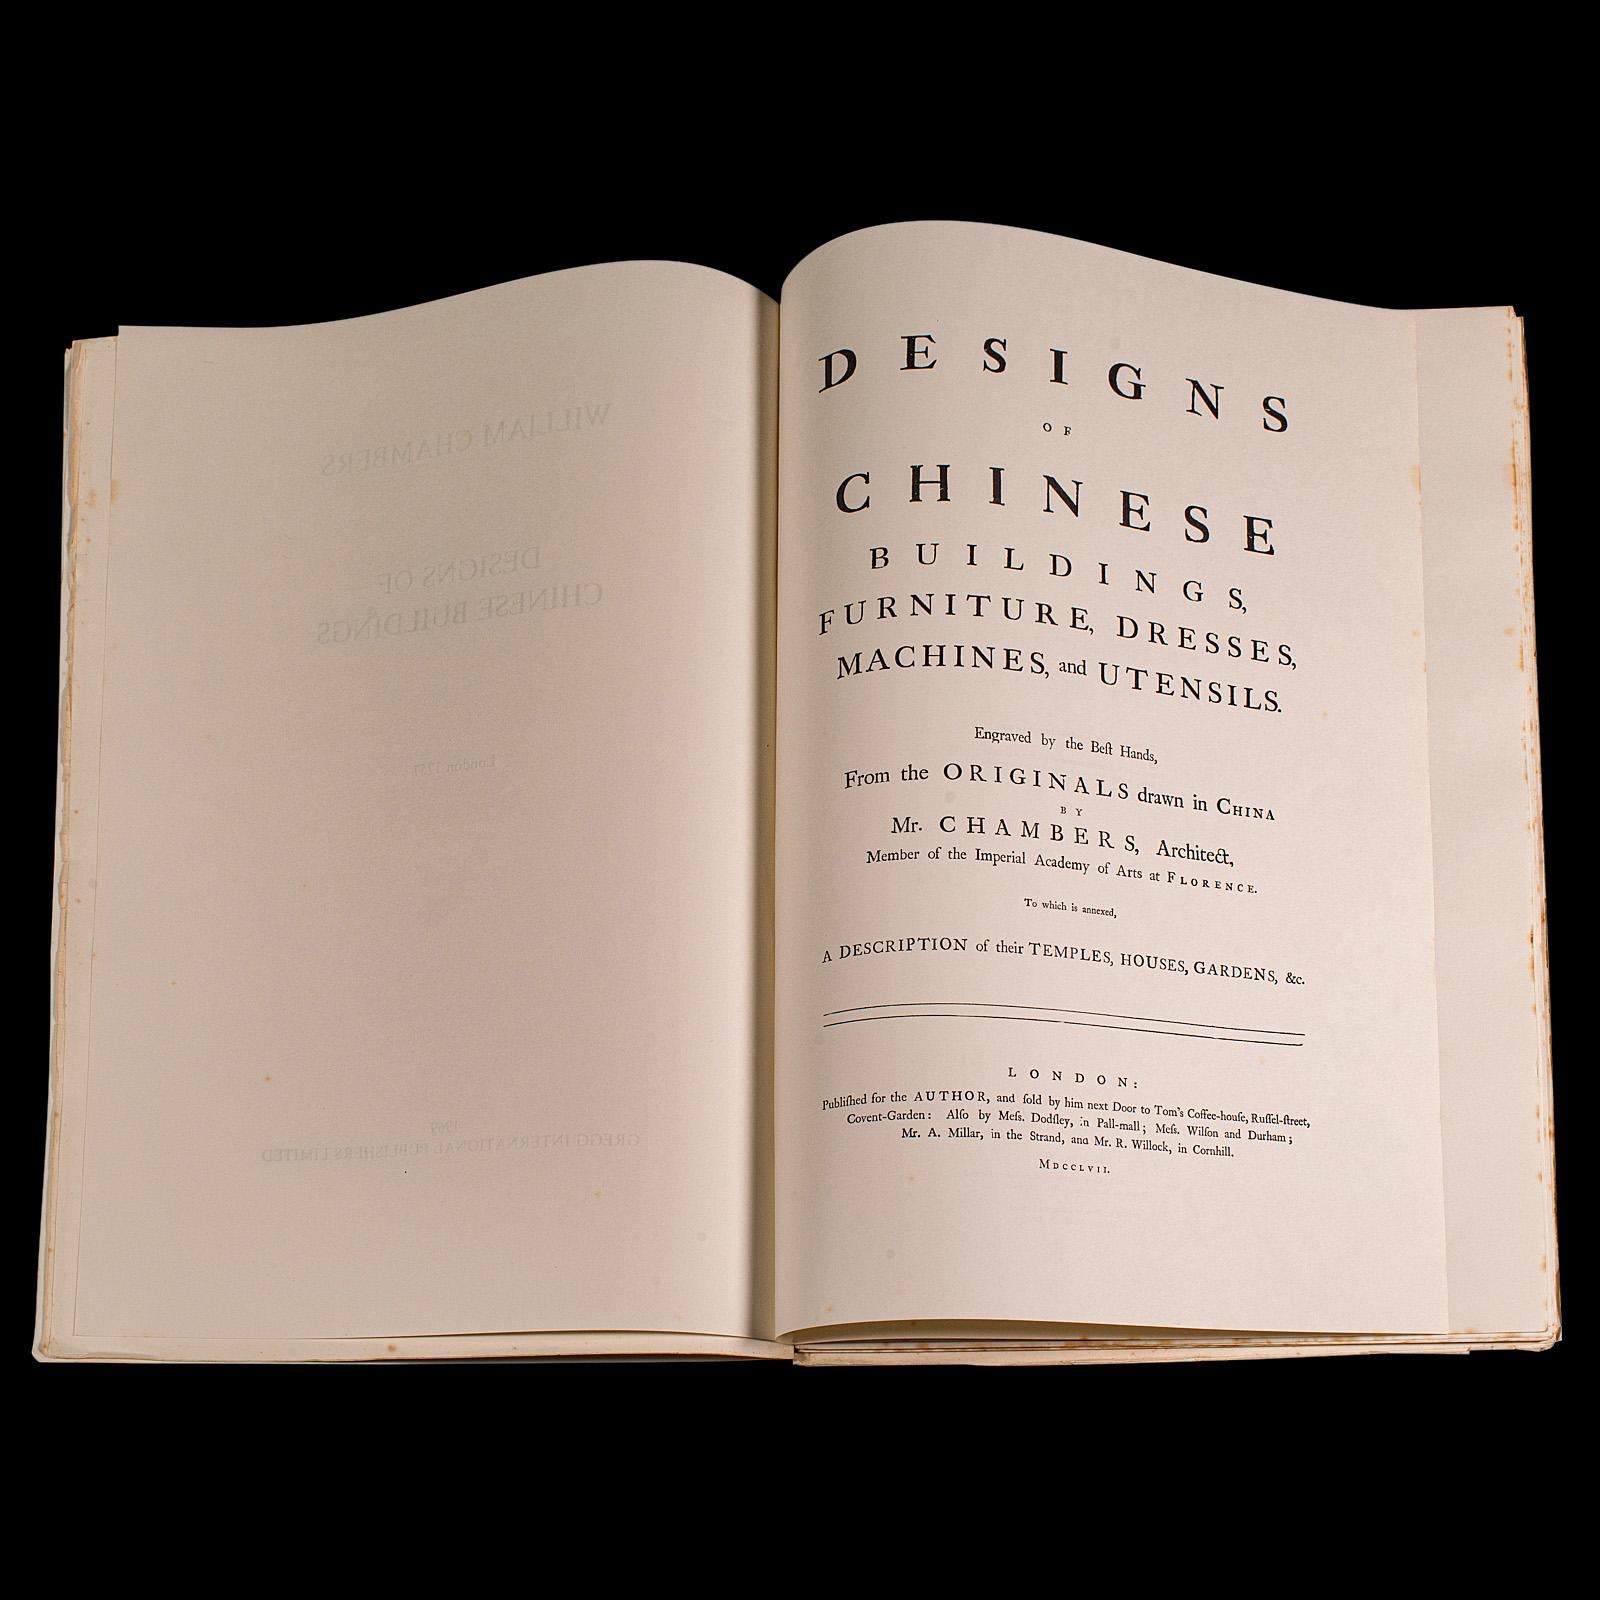 This is a vintage reproduction folio, A Design of Chinese Buildings, Furniture etc. An unbound reprint of the 18th century original by Sir William Chambers, printed in 1969.

Full Title: Design of Chinese Buildings, Furniture, Dresses, Machines and